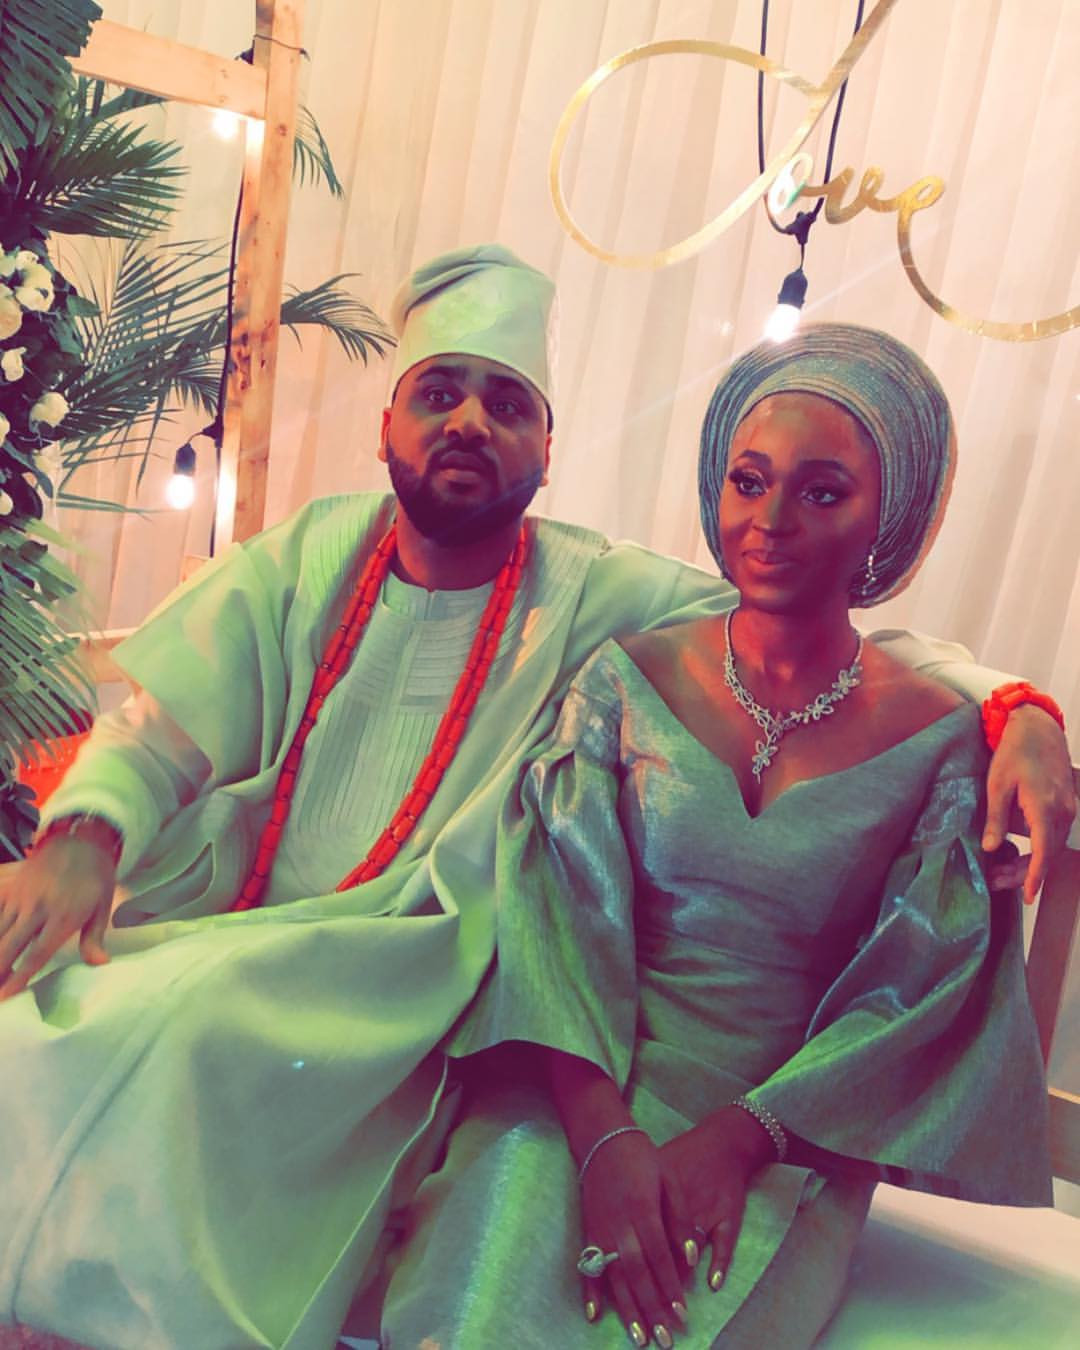 Photos from the traditional wedding of media personality, Illrymz